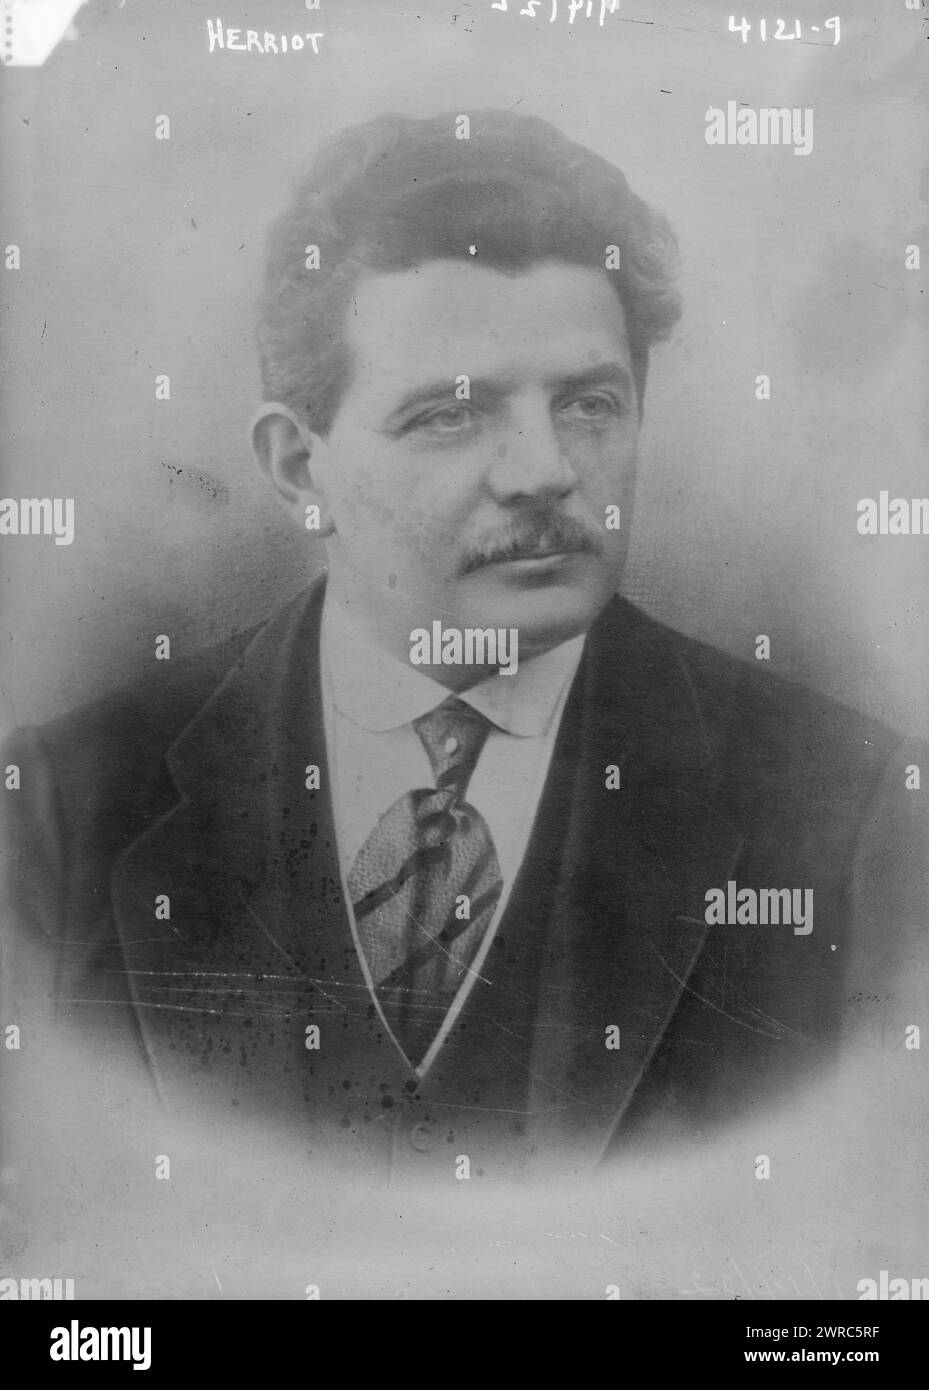 Herriot, Photograph shows French Radical politician Édouard Herriot (1872-1957)., between ca. 1915 and ca. 1920, Glass negatives, 1 negative: glass Stock Photo